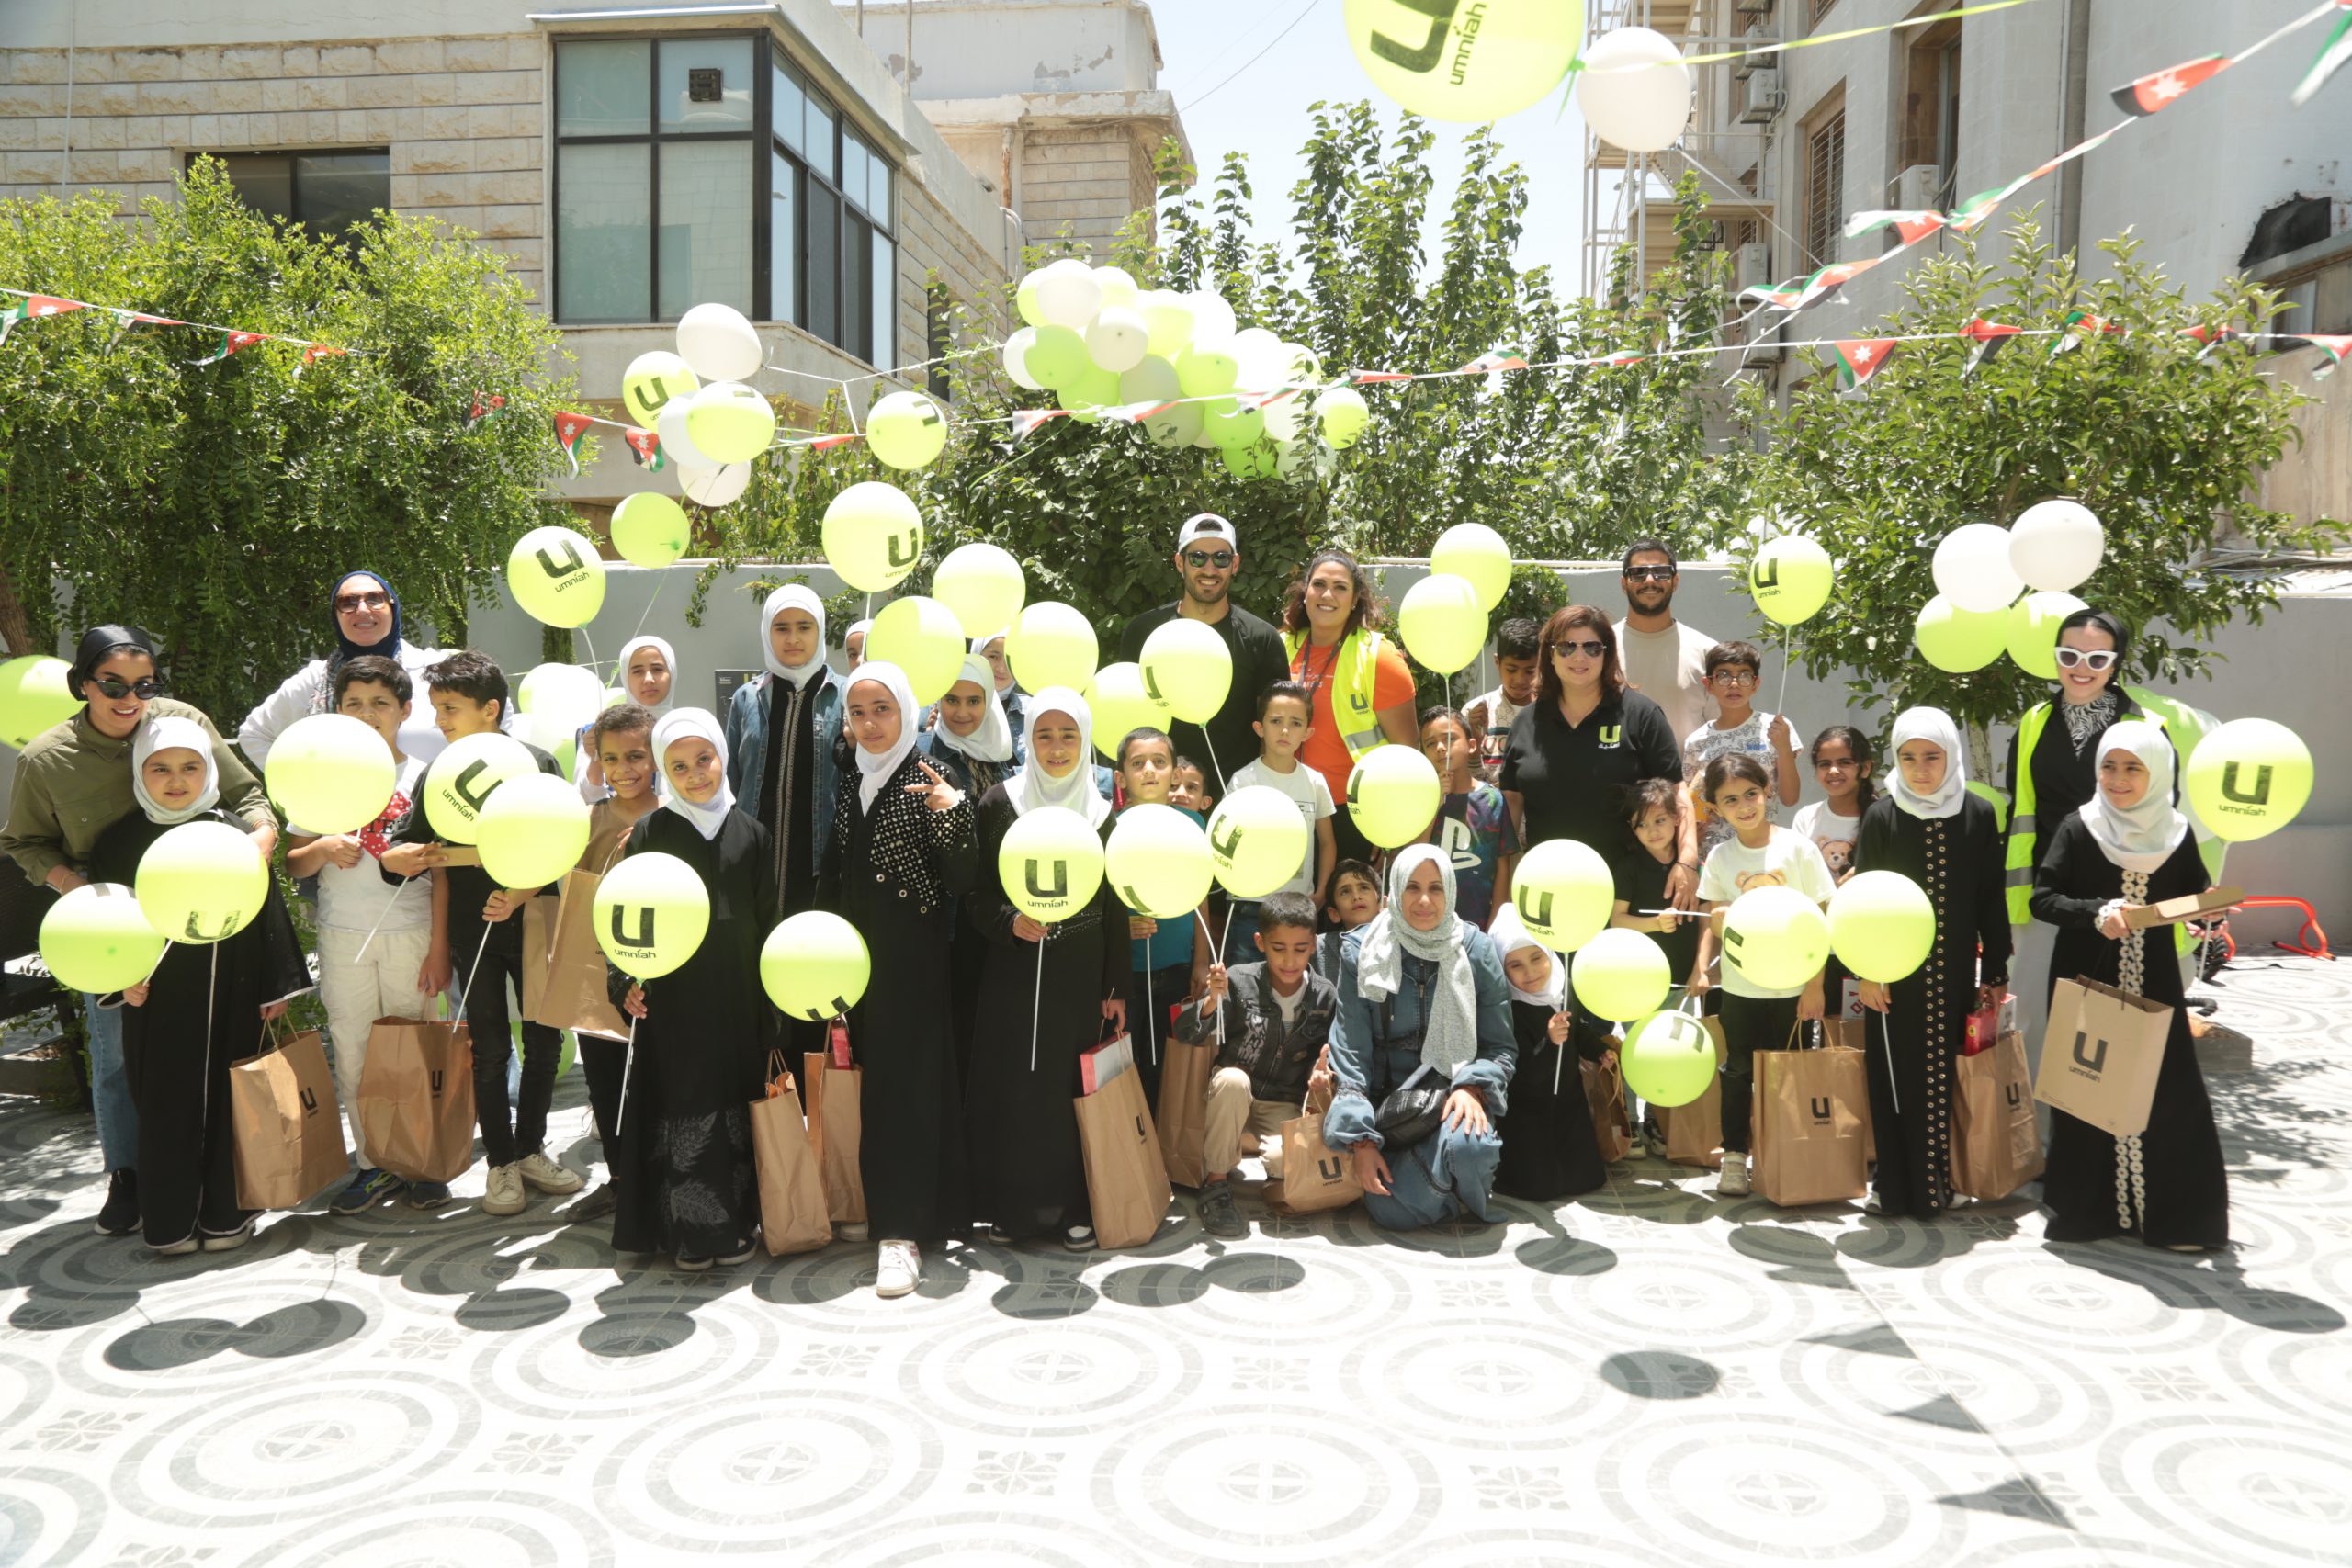 Umniah Hosts Eid Al-Adha Fun Day for the Children of Baqa’a Camp in Collaboration with ‘Think About Others’ Charity